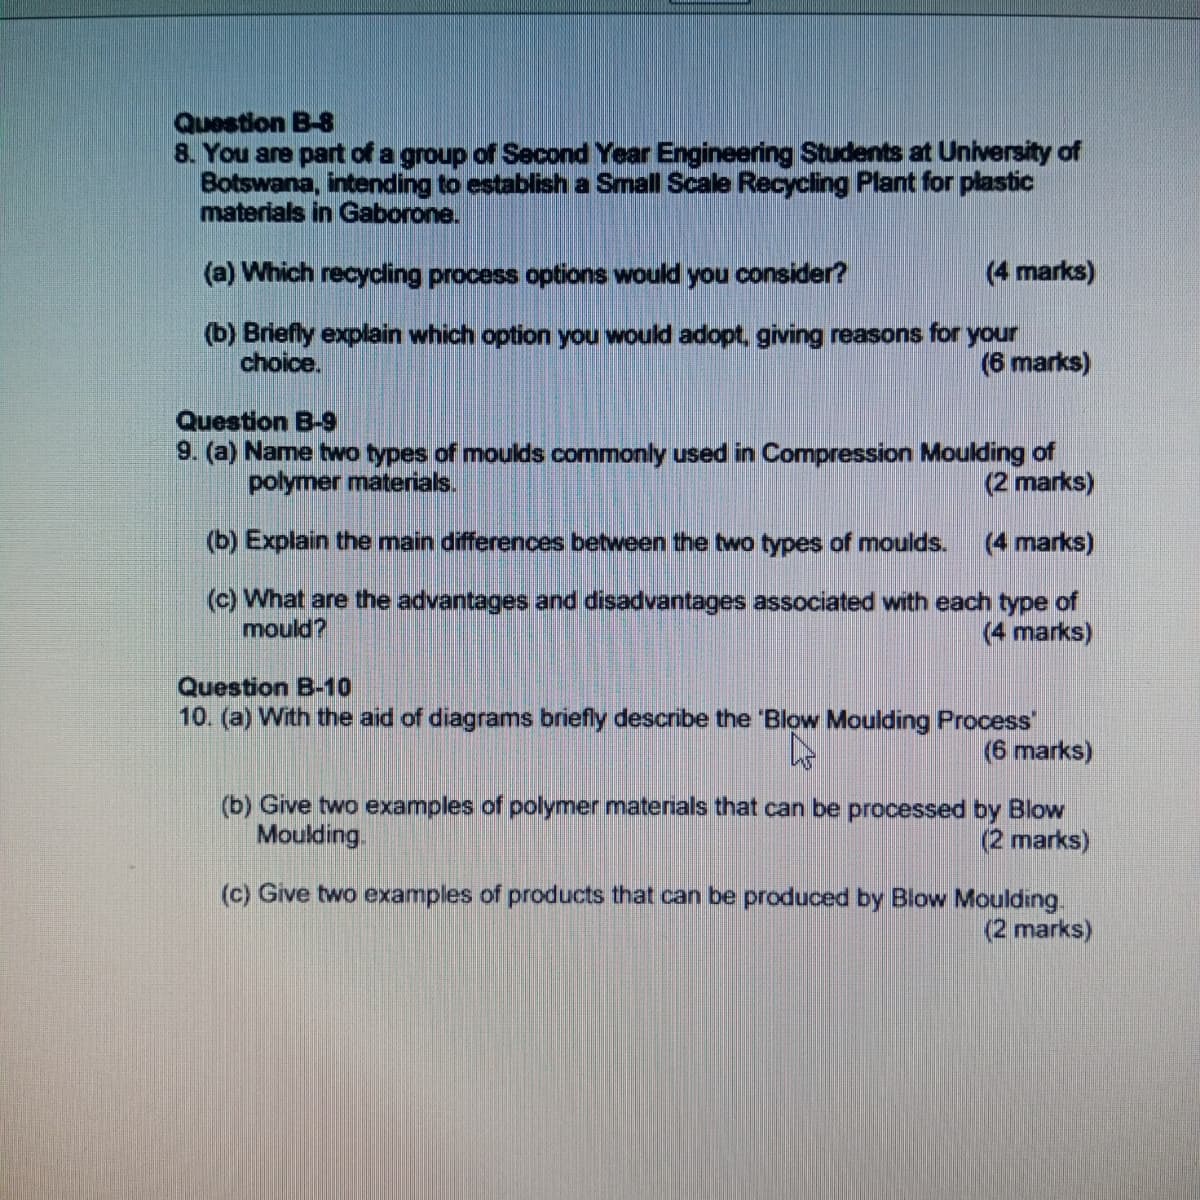 Question B-8
8. You are part of a group of Second Year Engineering Students at University of
Botswana, intending to establish a Small Scale Recycling Plant for plastic
materials in Gaborone.
(a) Which recycling process options would you consider?
(4 marks)
(b) Briefly explain which option you would adopt, giving reasons for your
choice.
(6 marks)
Question B-9
9. (a) Name two types of moulds commonly used in Compression Moulding of
polymer materials.
(2 marks)
(b) Explain the main differences between the two types of moulds.
(4 marks)
(c) What are the advantages and disadvantages associated with each type of
mould?
(4 marks)
Question B-10
10. (a) With the aid of diagrams briefly describe the 'Blow Moulding Process
(6 marks)
(b) Give two examples of polymer materials that can be processed by Blow
Moulding.
(2 marks)
(c) Give two examples of products that can be produced by Blow Moulding.
(2 marks)